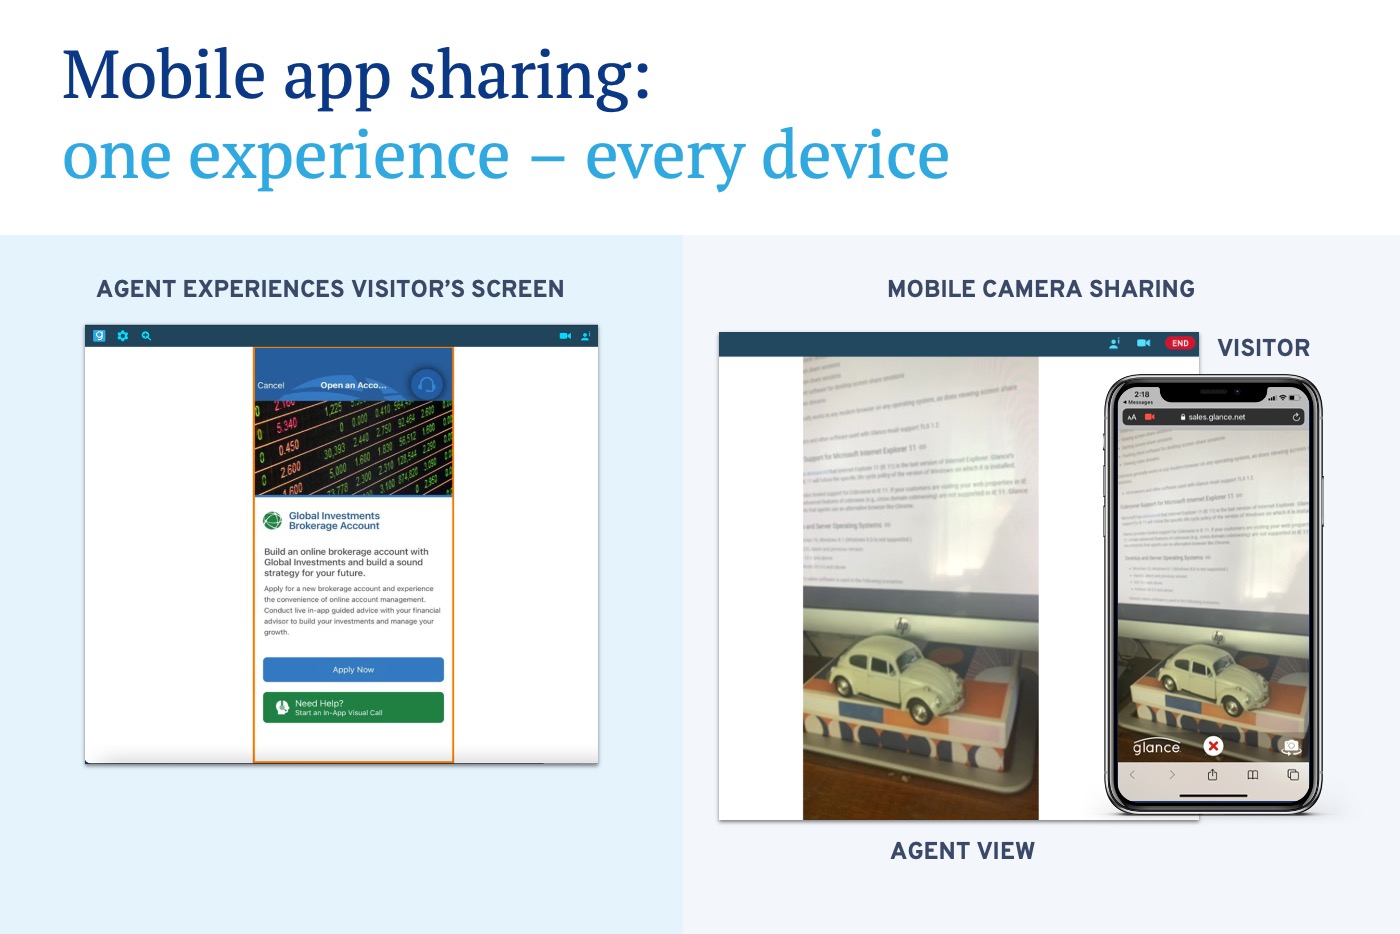 Mobile app and mobile video share enable support anywhere.